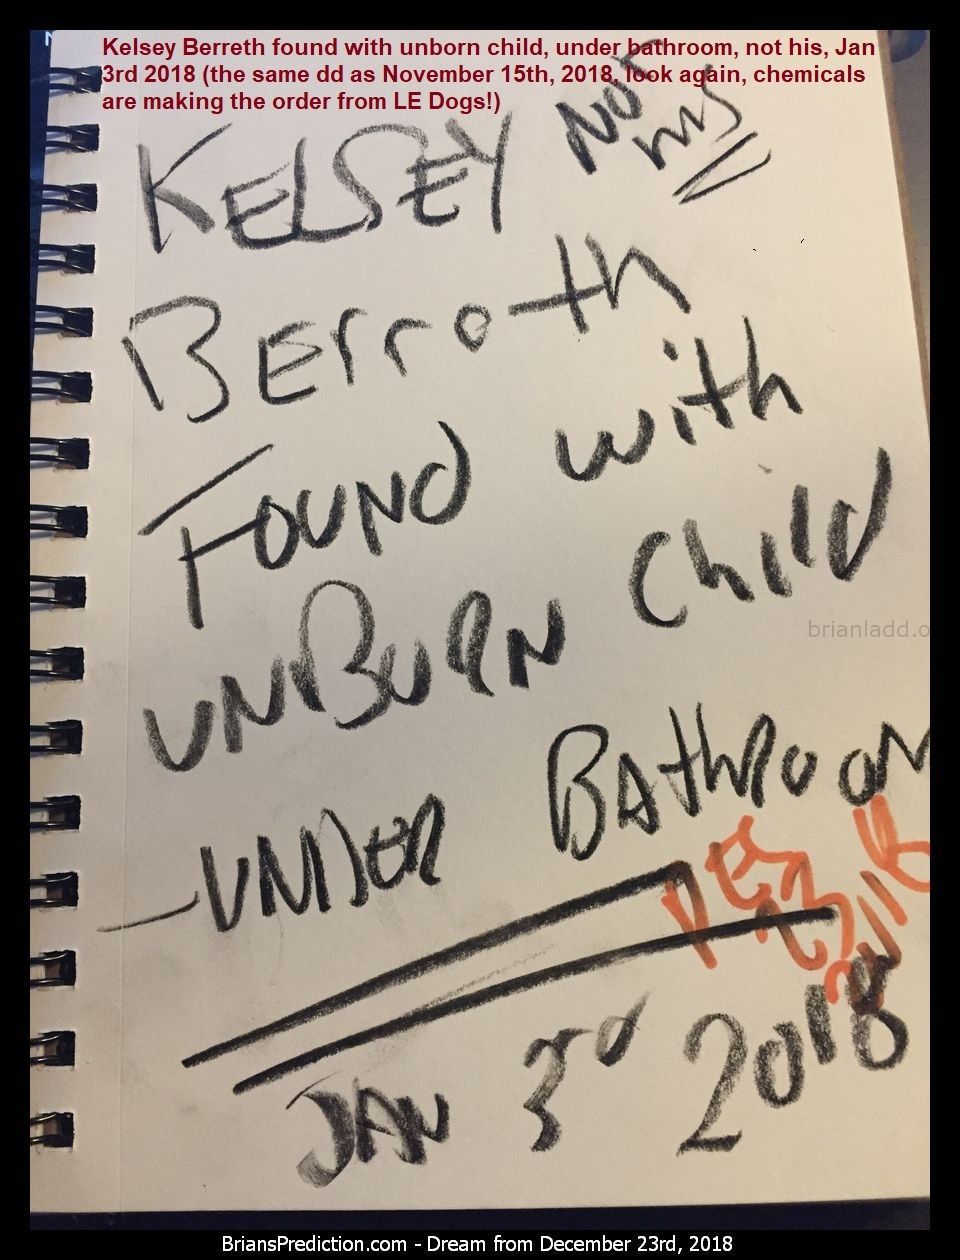 Kelsey Berreth Found Breaking News - Kelsey Berreth Found With Unborn Child, Under Bathroom, Not His, Jan 3rd 2018 (the ...
Kelsey Berreth Found With Unborn Child, Under Bathroom, Not His, Jan 3rd 2018 (the Same Dd As November 15th, 2018, Look Again, Chemicals Are Making The Order From Le Dogs!)
